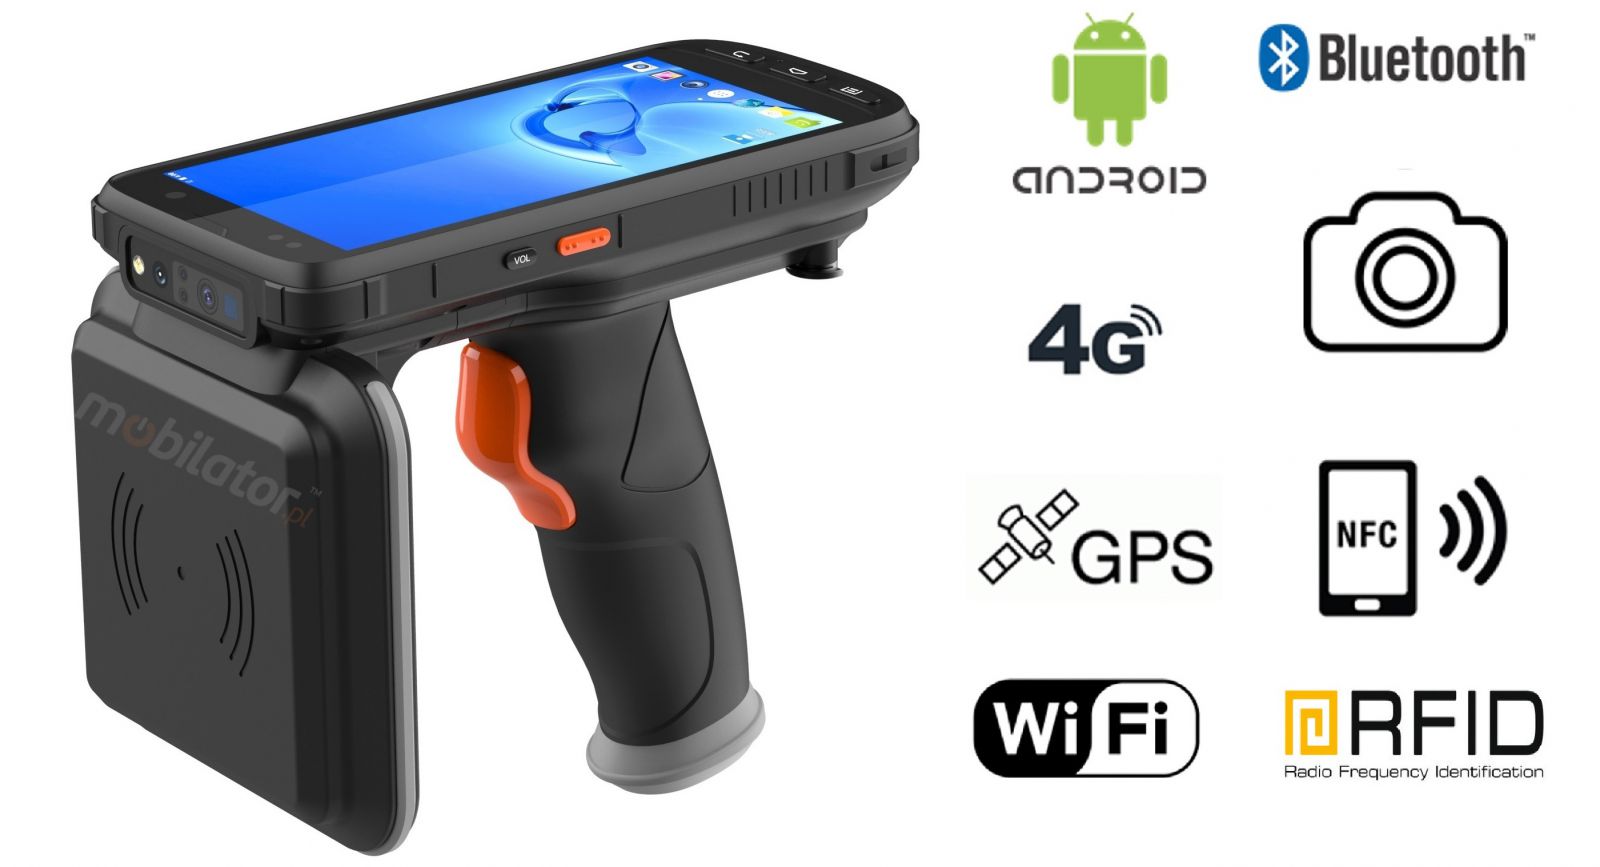 MobiPad XX-B6 v.3 - Industrial collector-inventory in the form of a gun with the standard IP65 (Android 10 System) and NFC + 4G LTE + Bluetooth + WiFi with UHF reader (range up to 18m) 